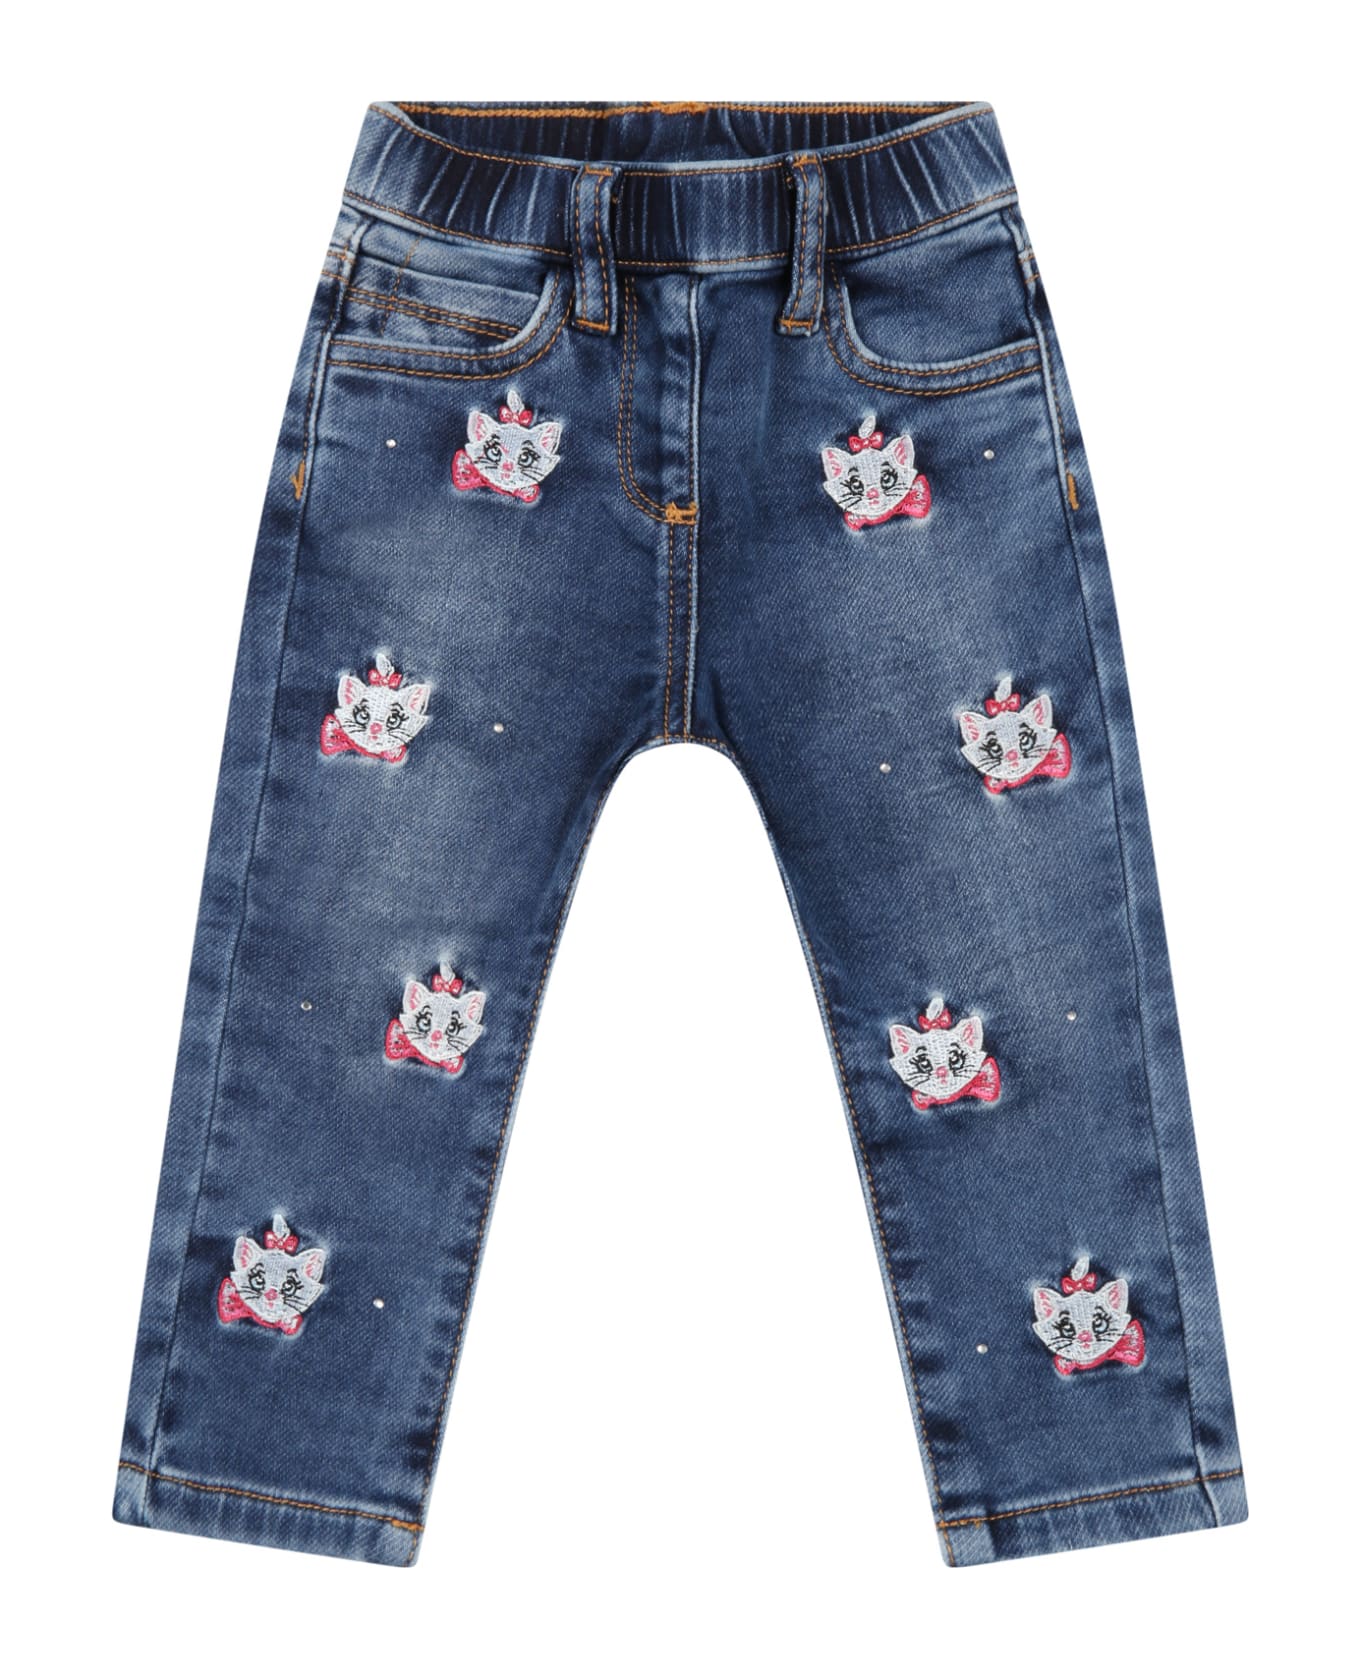 Monnalisa Blue Jeans For Baby Girl With Aristocats - Denim